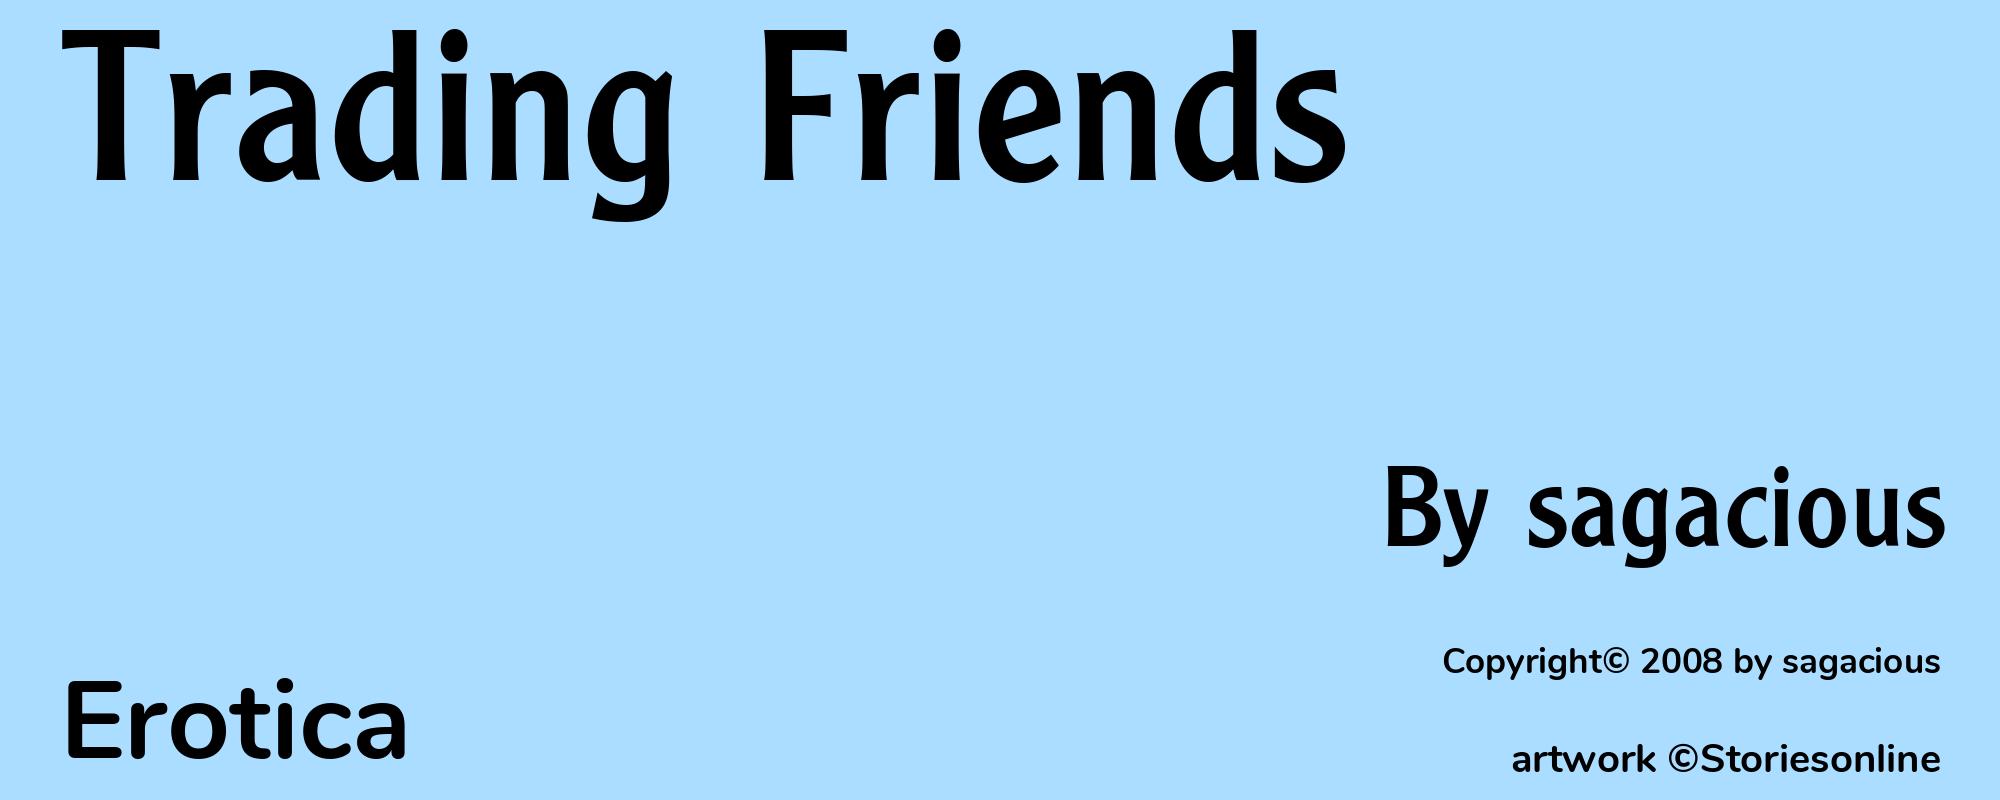 Trading Friends - Cover